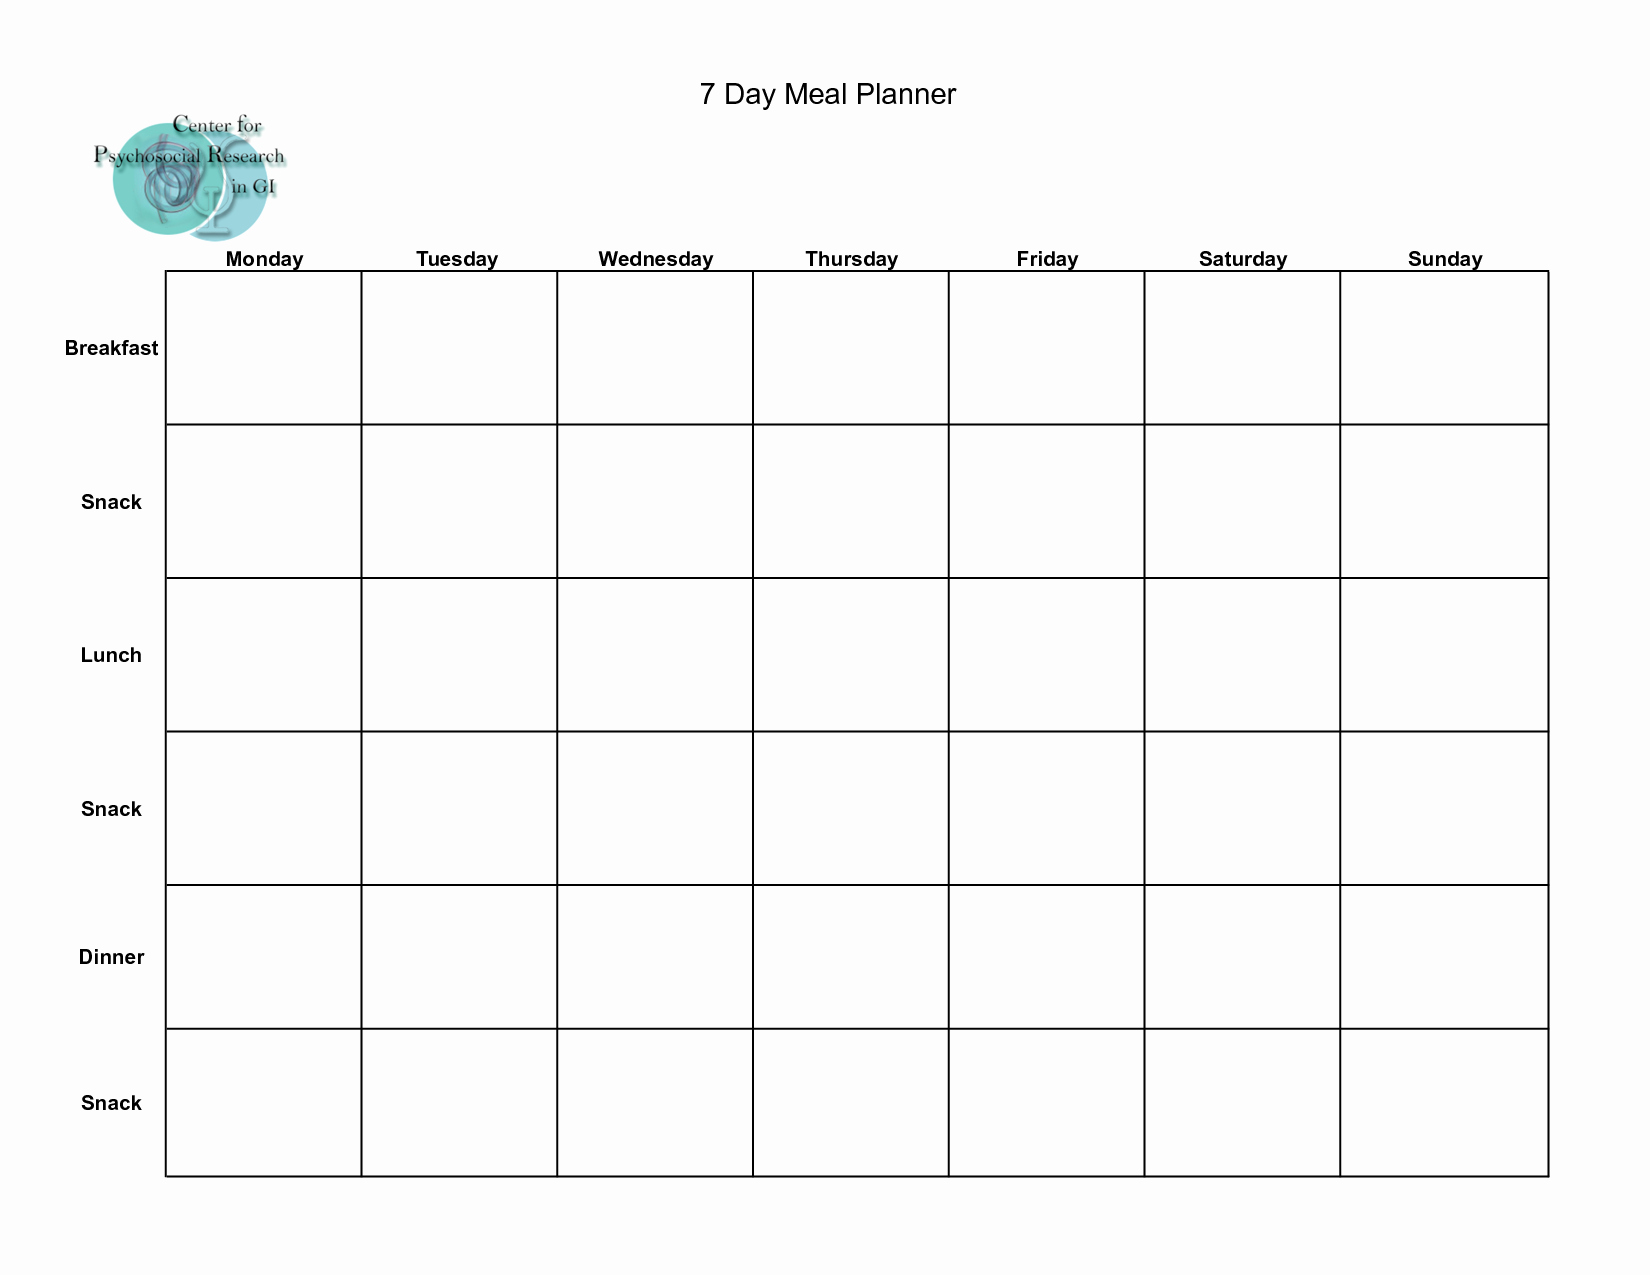 7 Day Menu Planner Template Unique Best S Of Blank Meal Planner Sheet Printable 7 Day